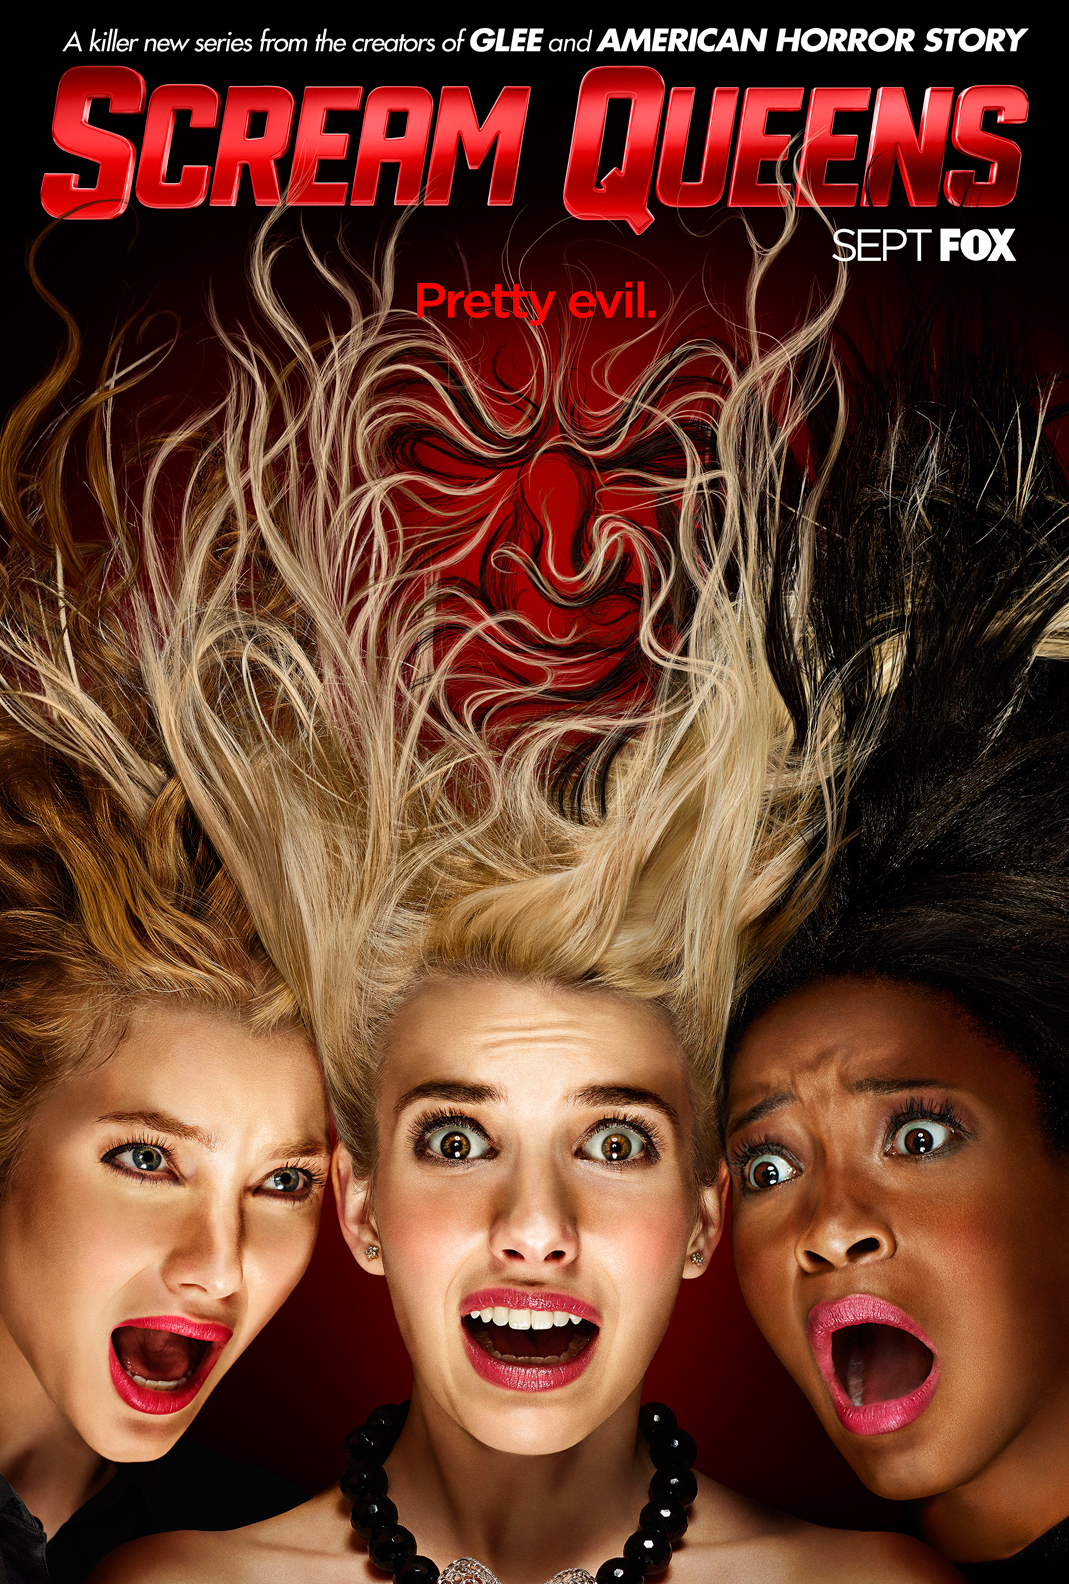 how many episodes in scream queens season 1